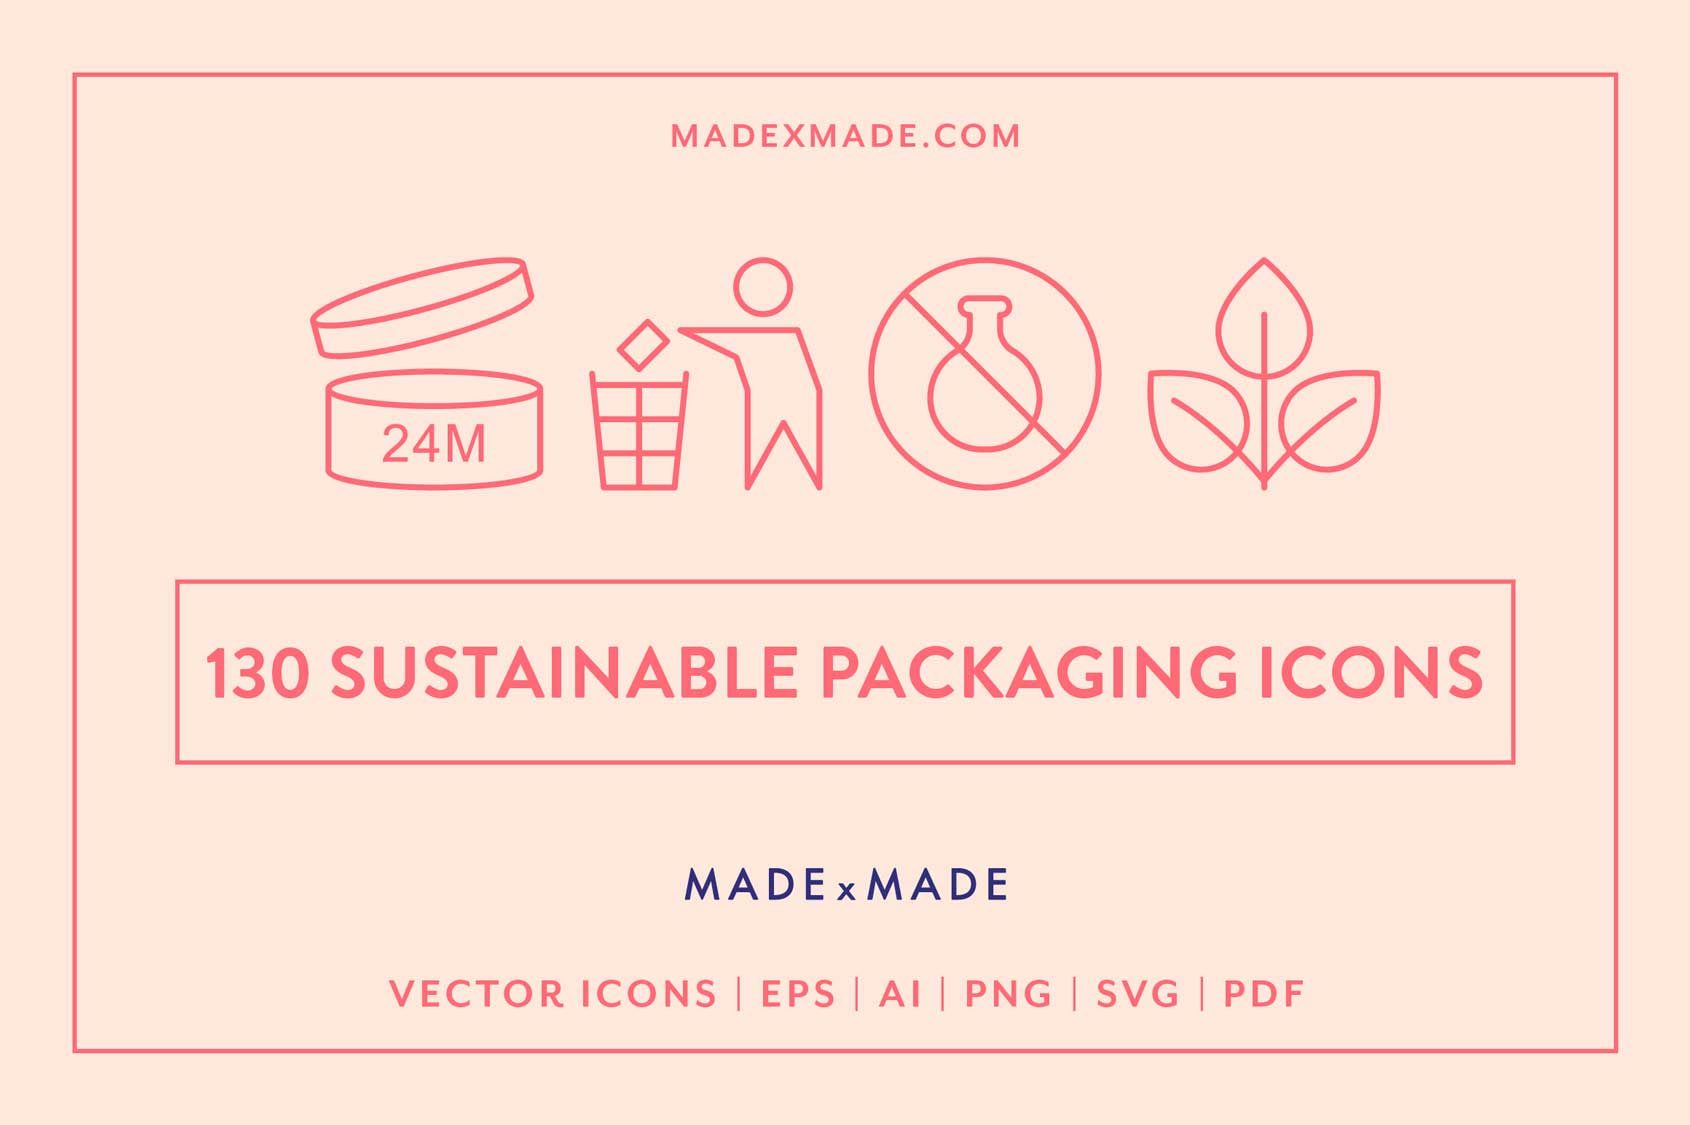 made x made icons 4x Packaging Bundle 25% Off cover – downloadable icons and symbols for packaging and labeling - sustainable packaging